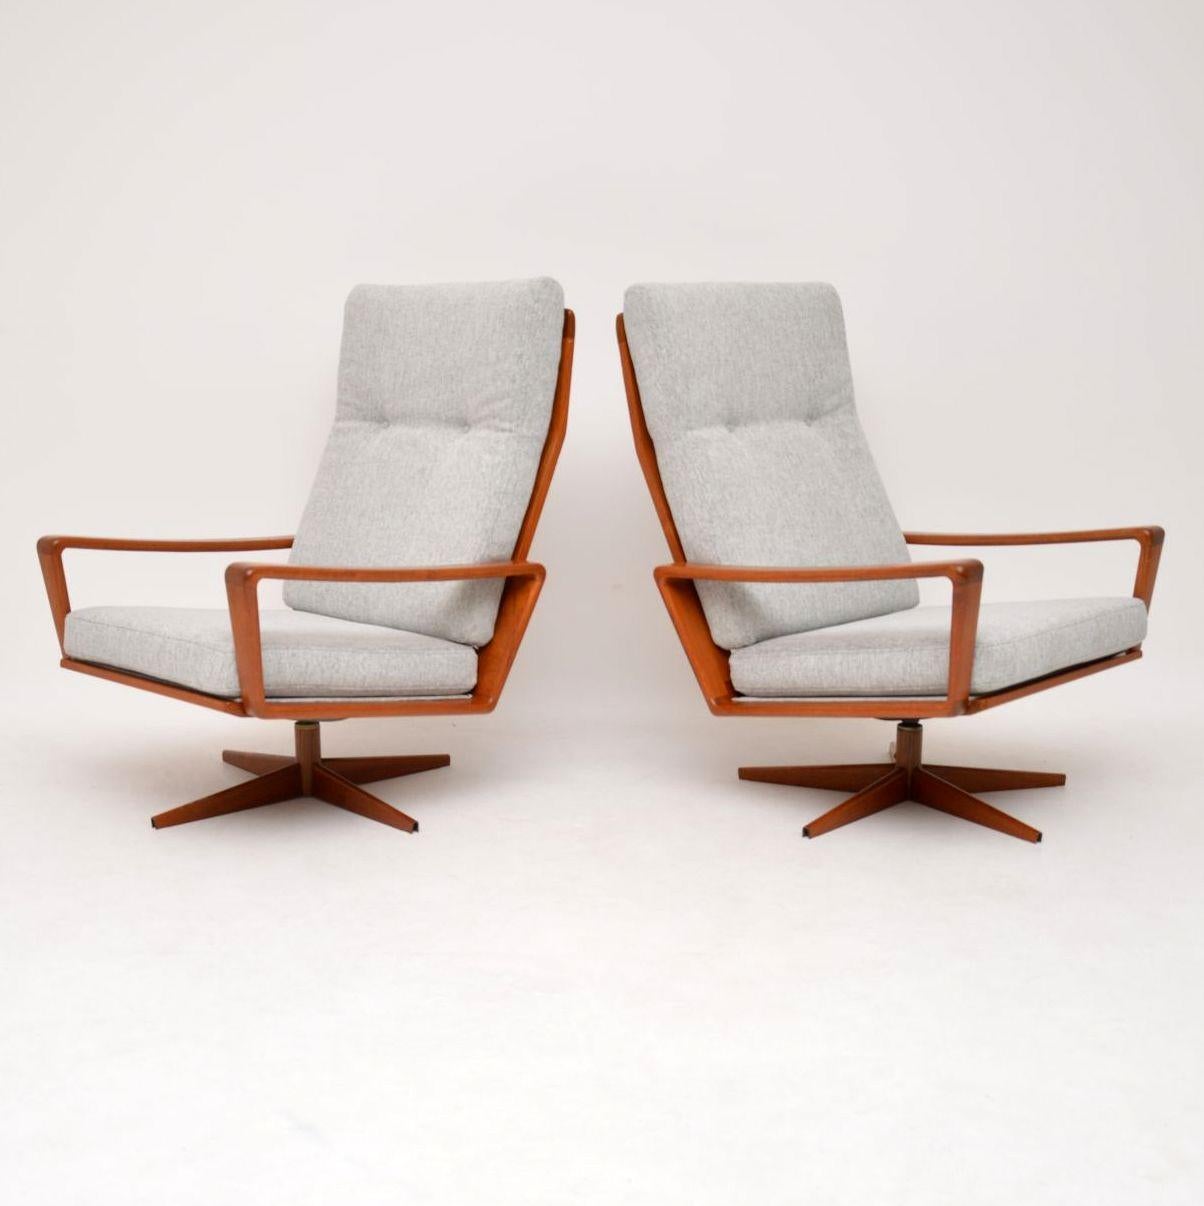 A stylish and extremely comfortable pair of vintage Danish swivel armchairs in teak, these were designed by Arne Wahl Iversen for Komfort, they date from the 1960's. We have had the frames stripped and re-polished to a very high standard, the light